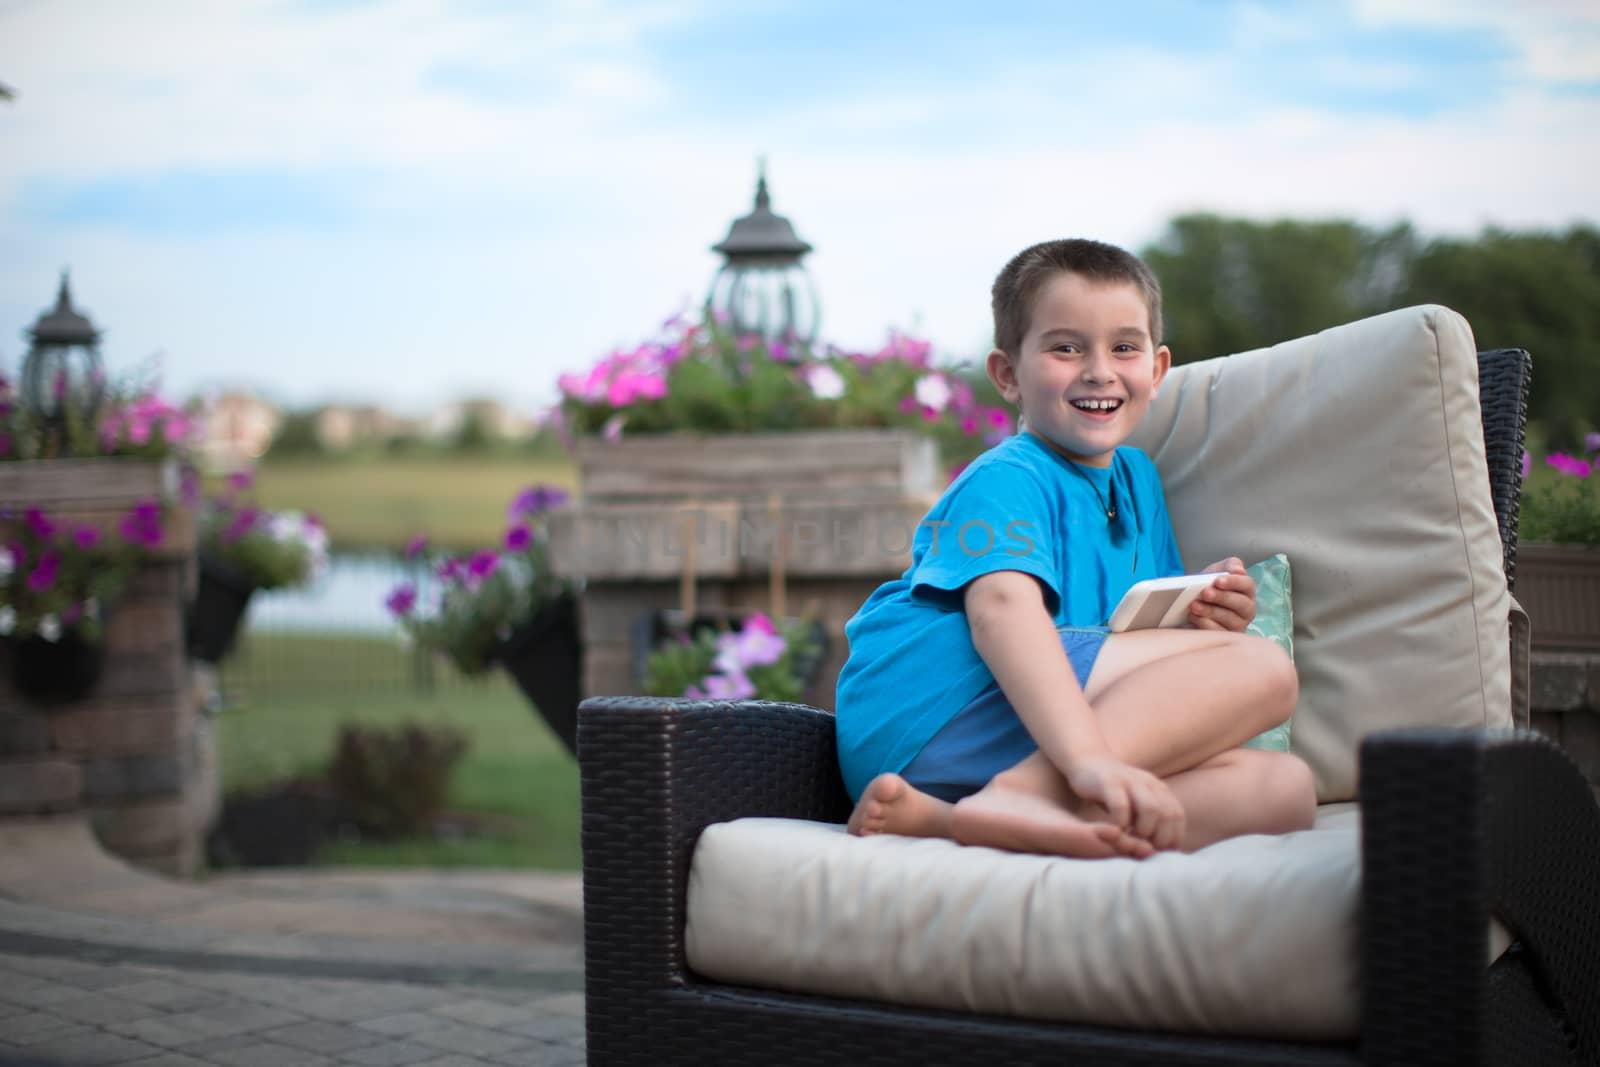 Young boy smiling at camera with a large genuine smile on the wicker seat at the patio